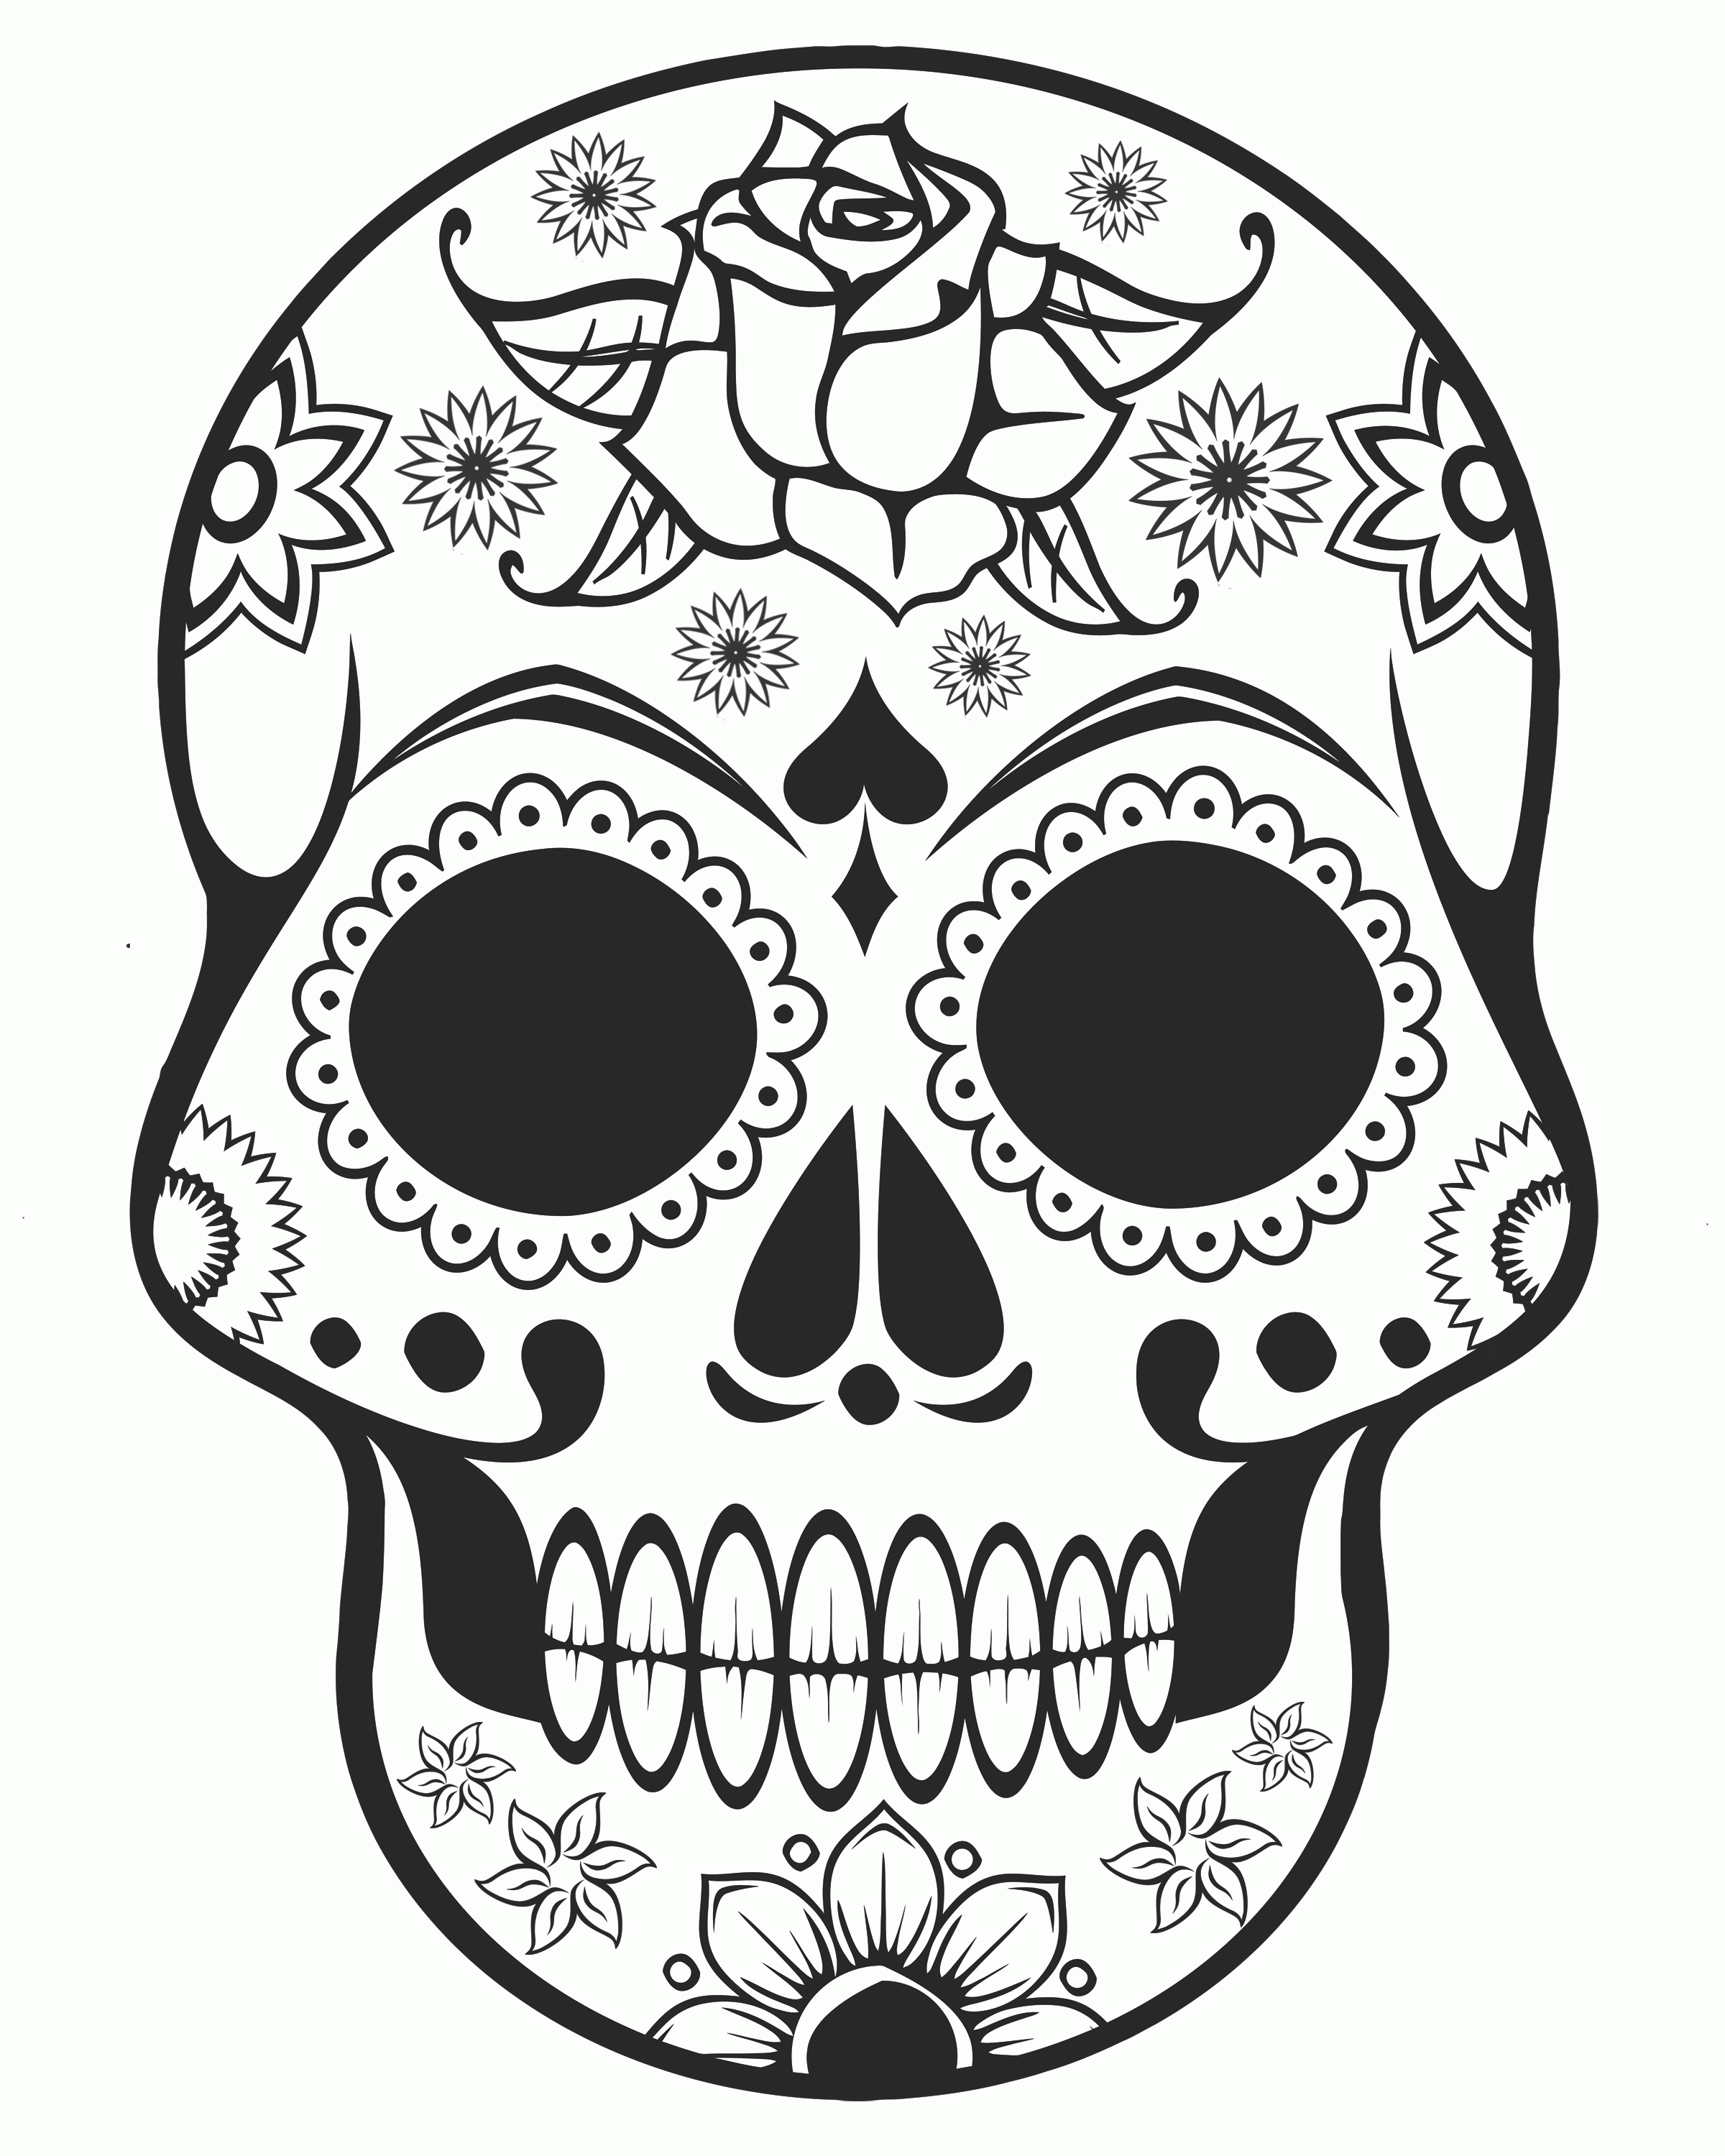 16 Free Pictures for: Skull Coloring Pages. Temoon.us